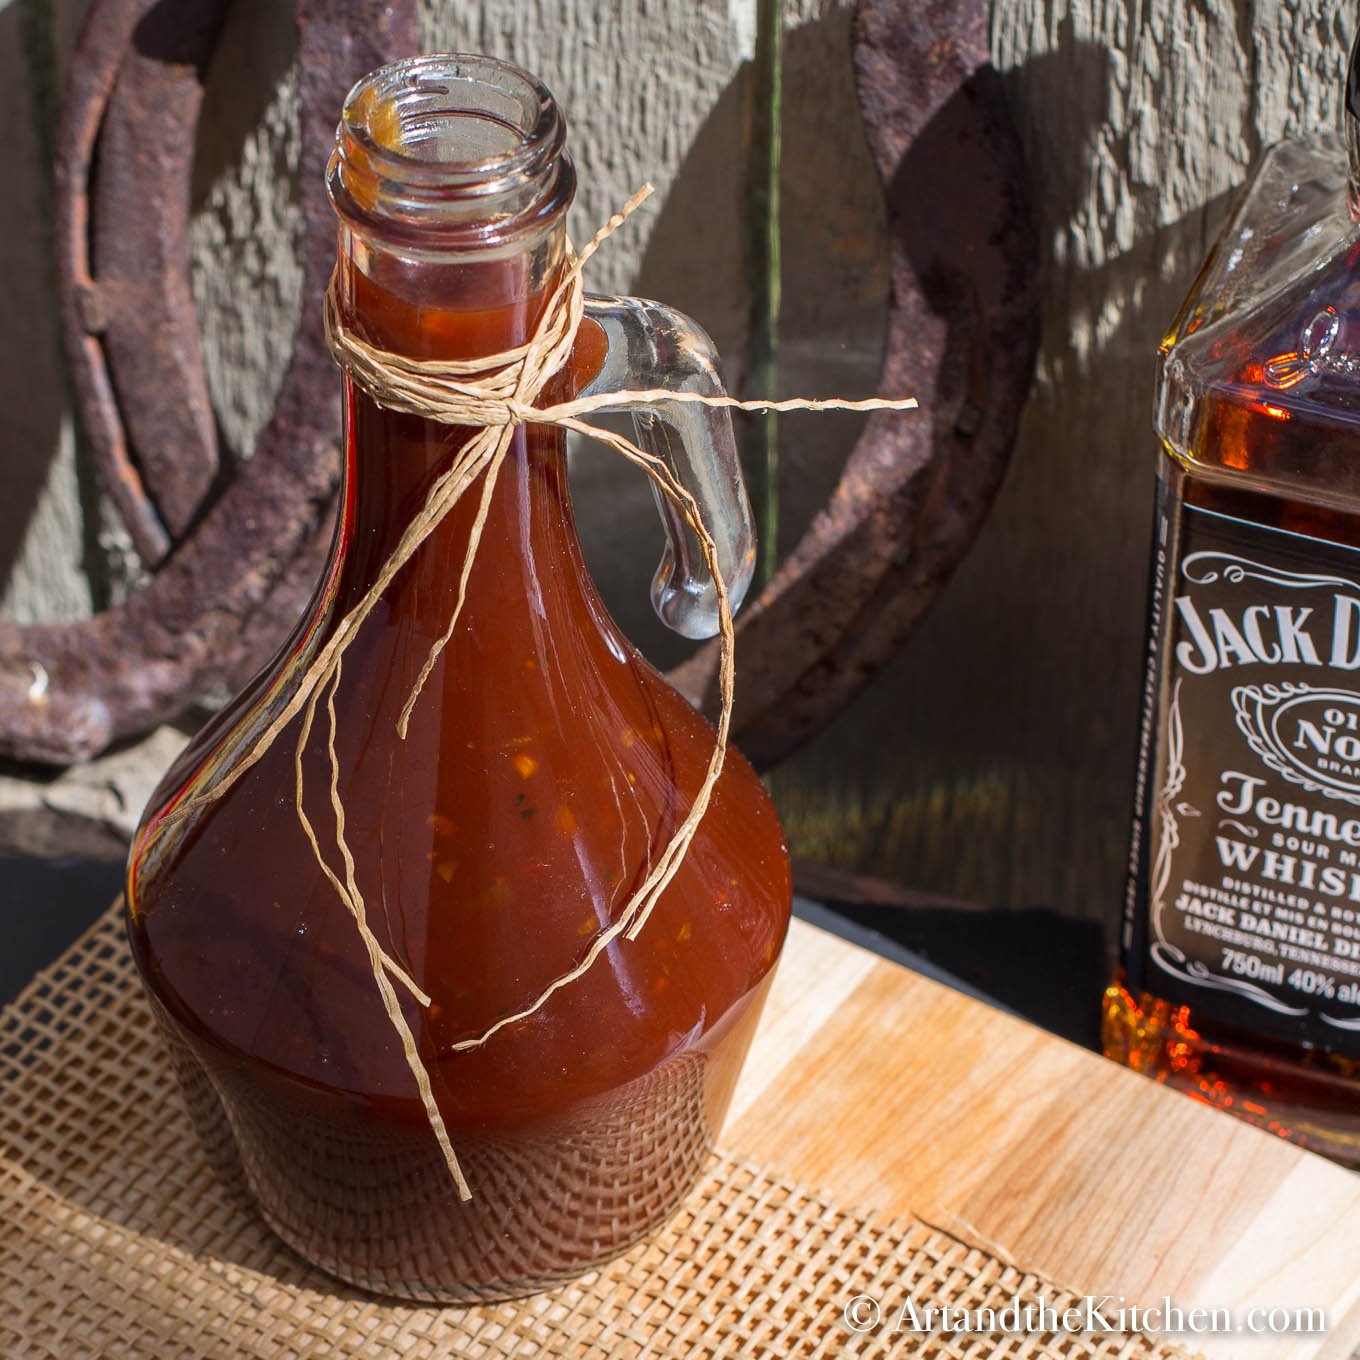 Decorative glass jar filled with homemade BBQ sauce on wood board with bottle of Jack Daniel's whiskey in background.